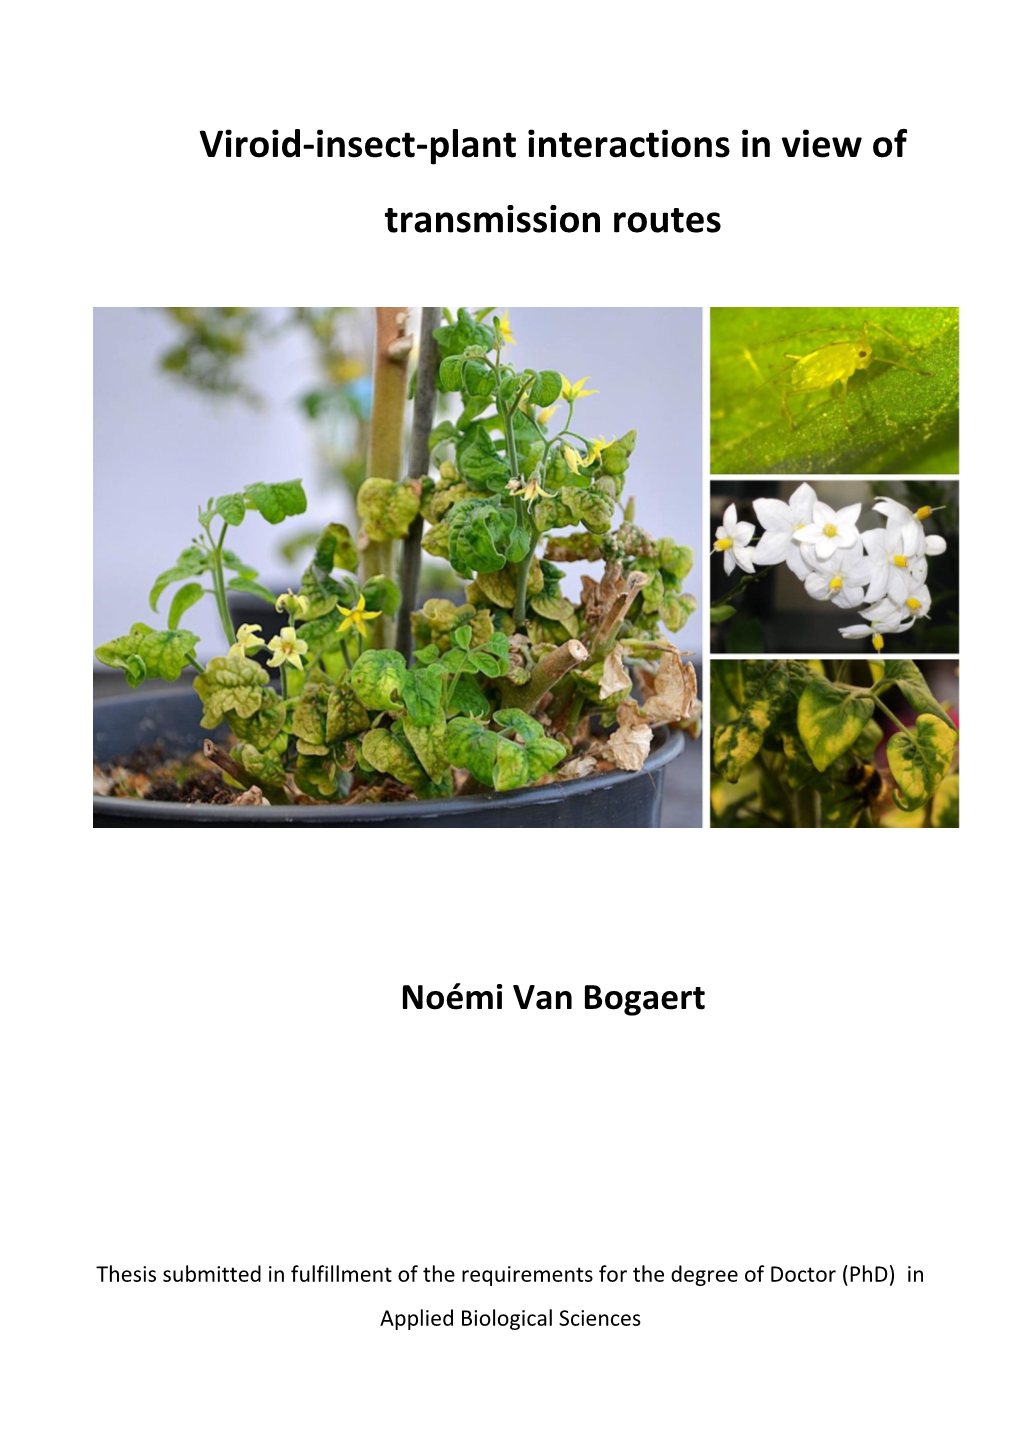 Viroid-Insect-Plant Interactions in View of Transmission Routes